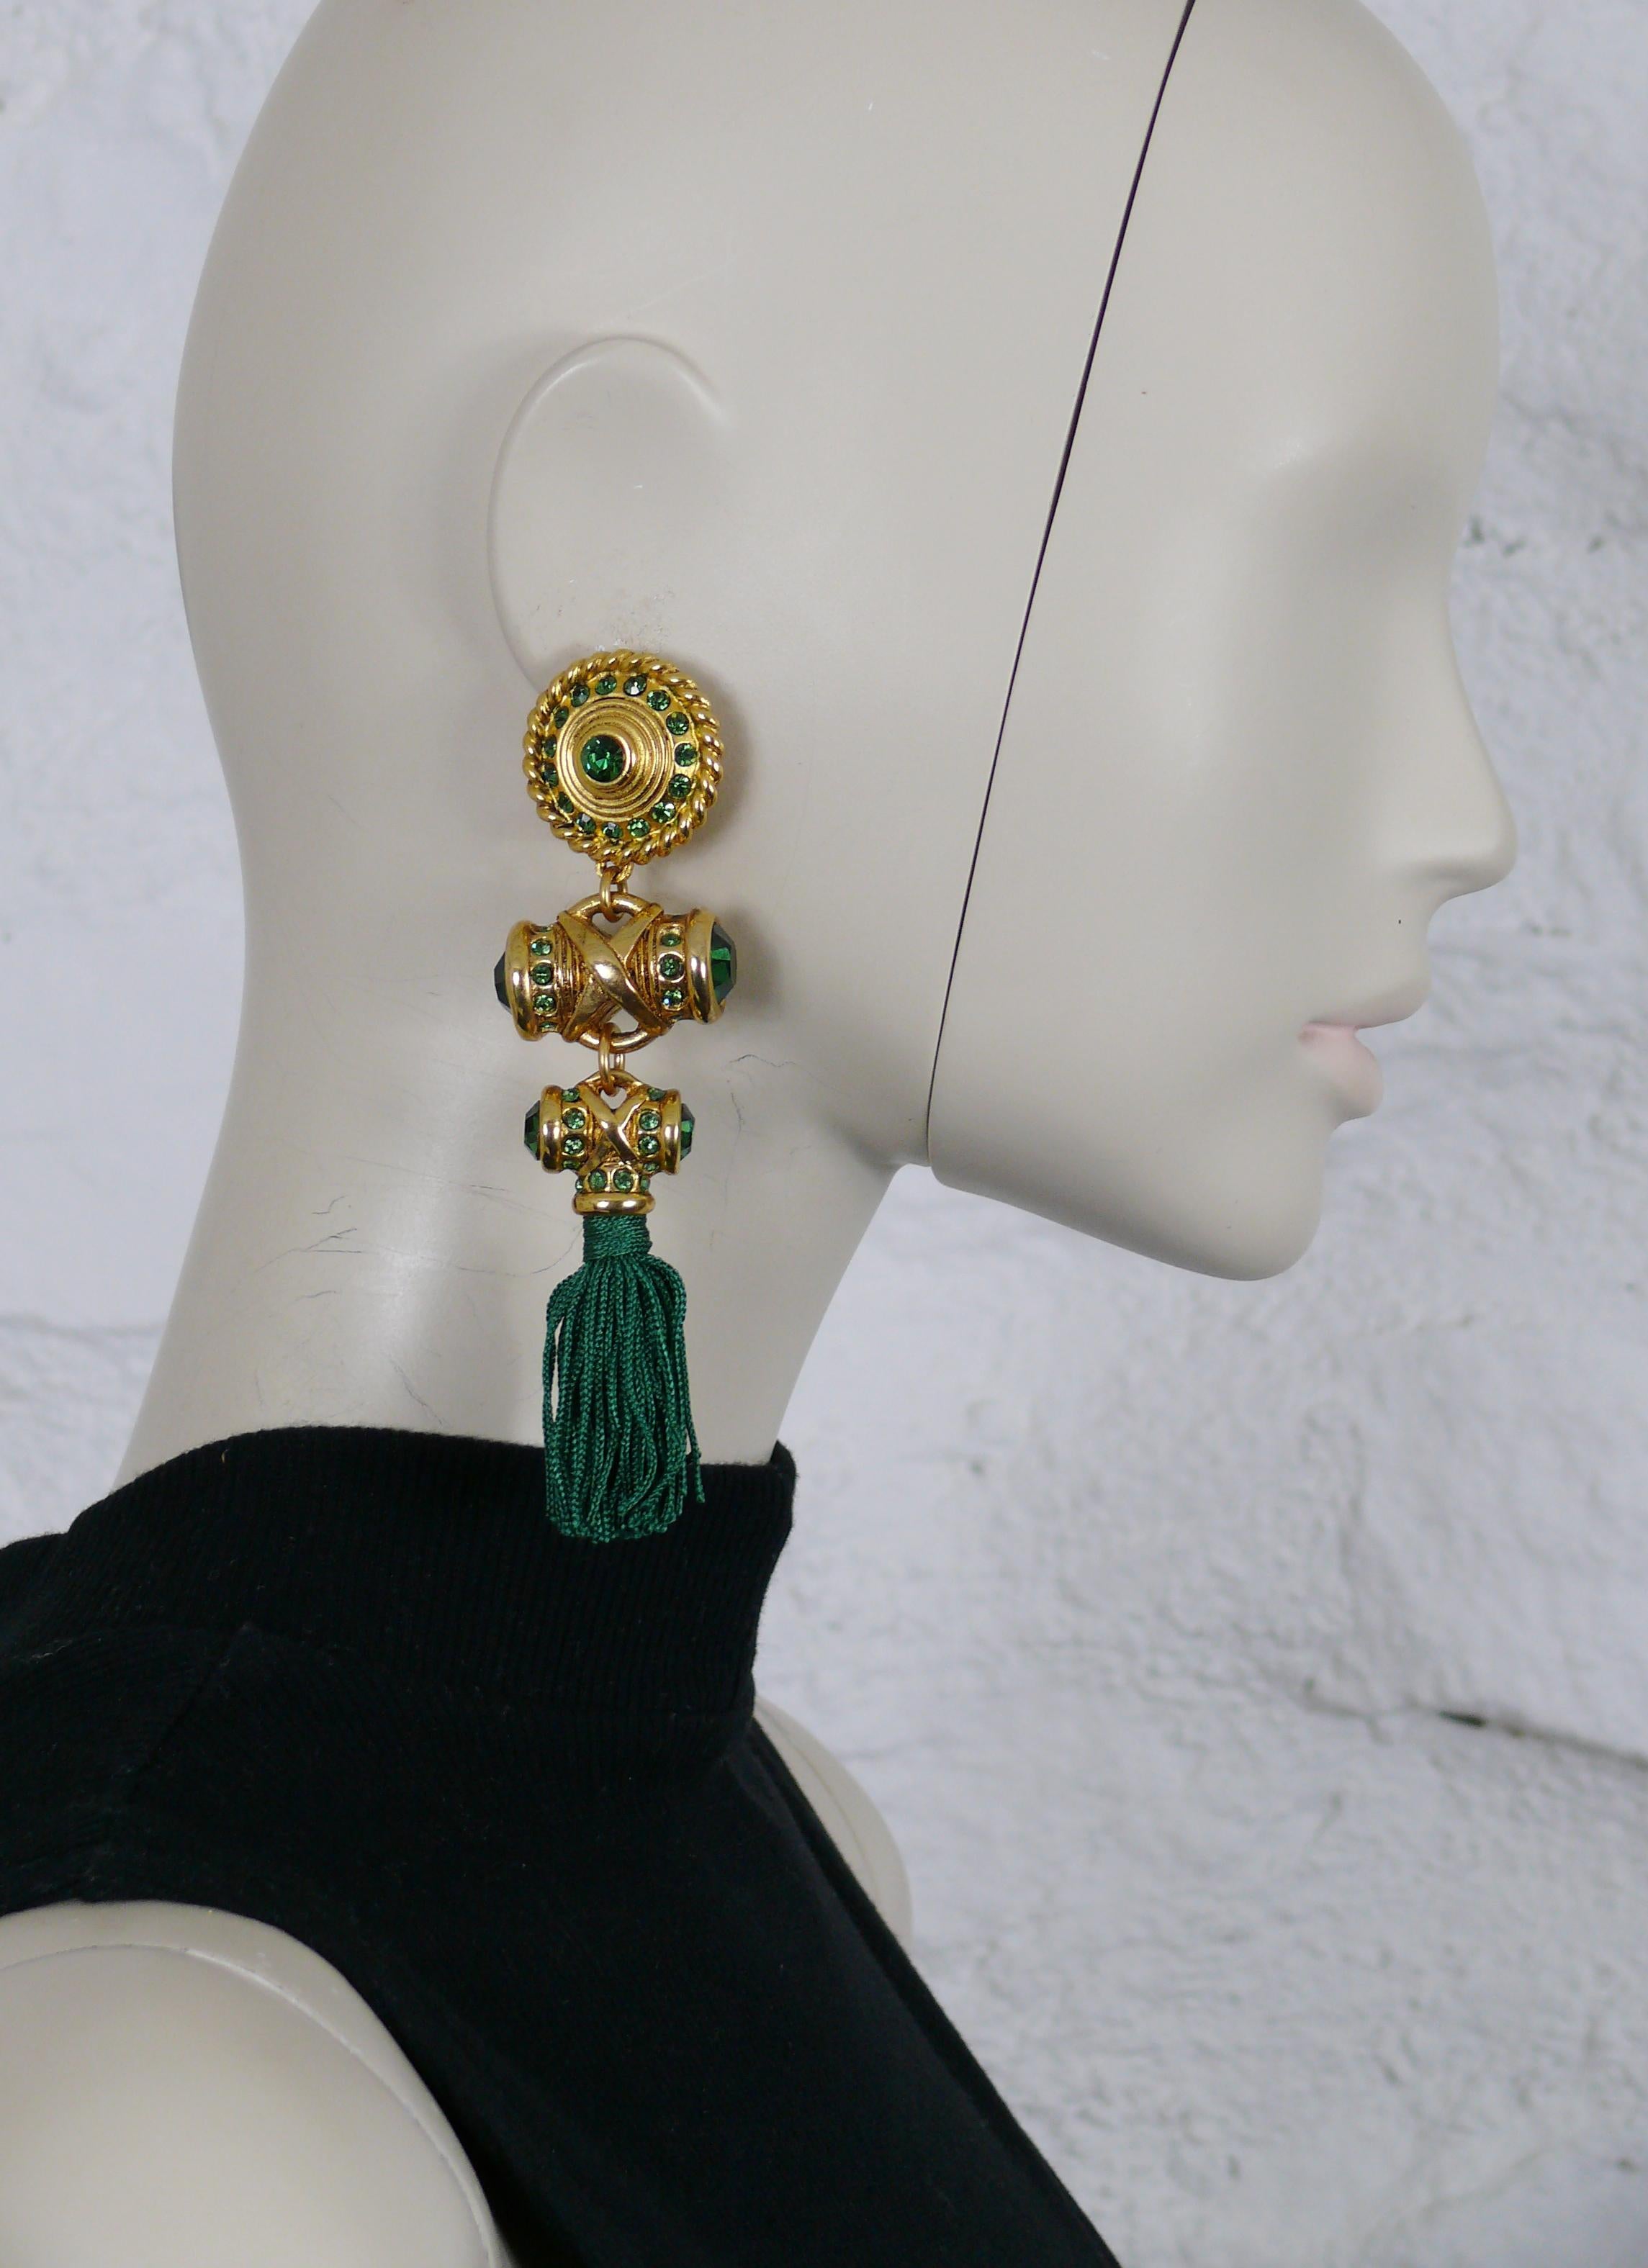 CLAIRE DEVE vintage gold toned dangling earrings (clip-on) featuring a green passementerie tassel and green crystals.

Embossed CLAIRE DEVE Paris (only on one earring as shown on the picture).

Indicative measurements : height approx. 11.5 cm (4.53